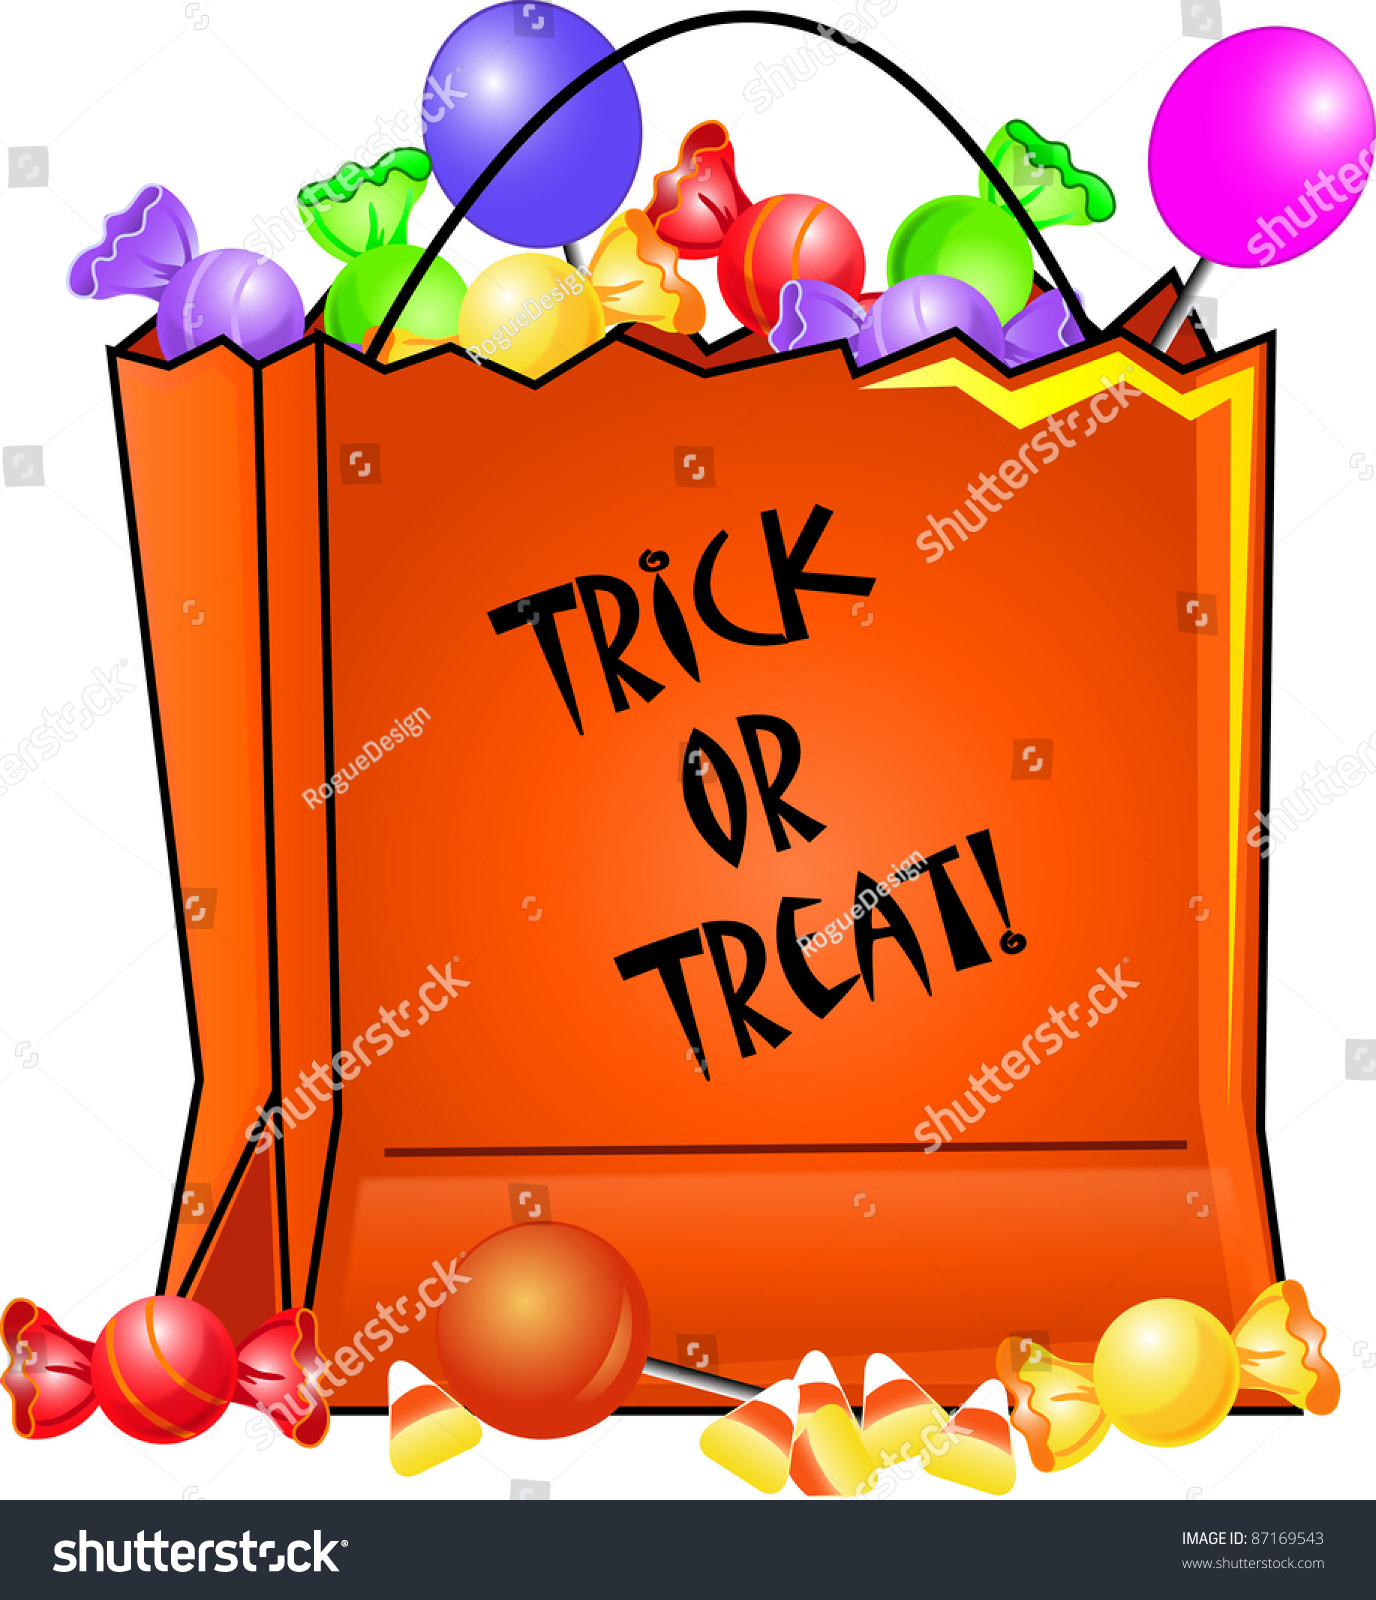 Clip Art Illustration Of A Halloween Trick Or Treat Bag Filled With ...